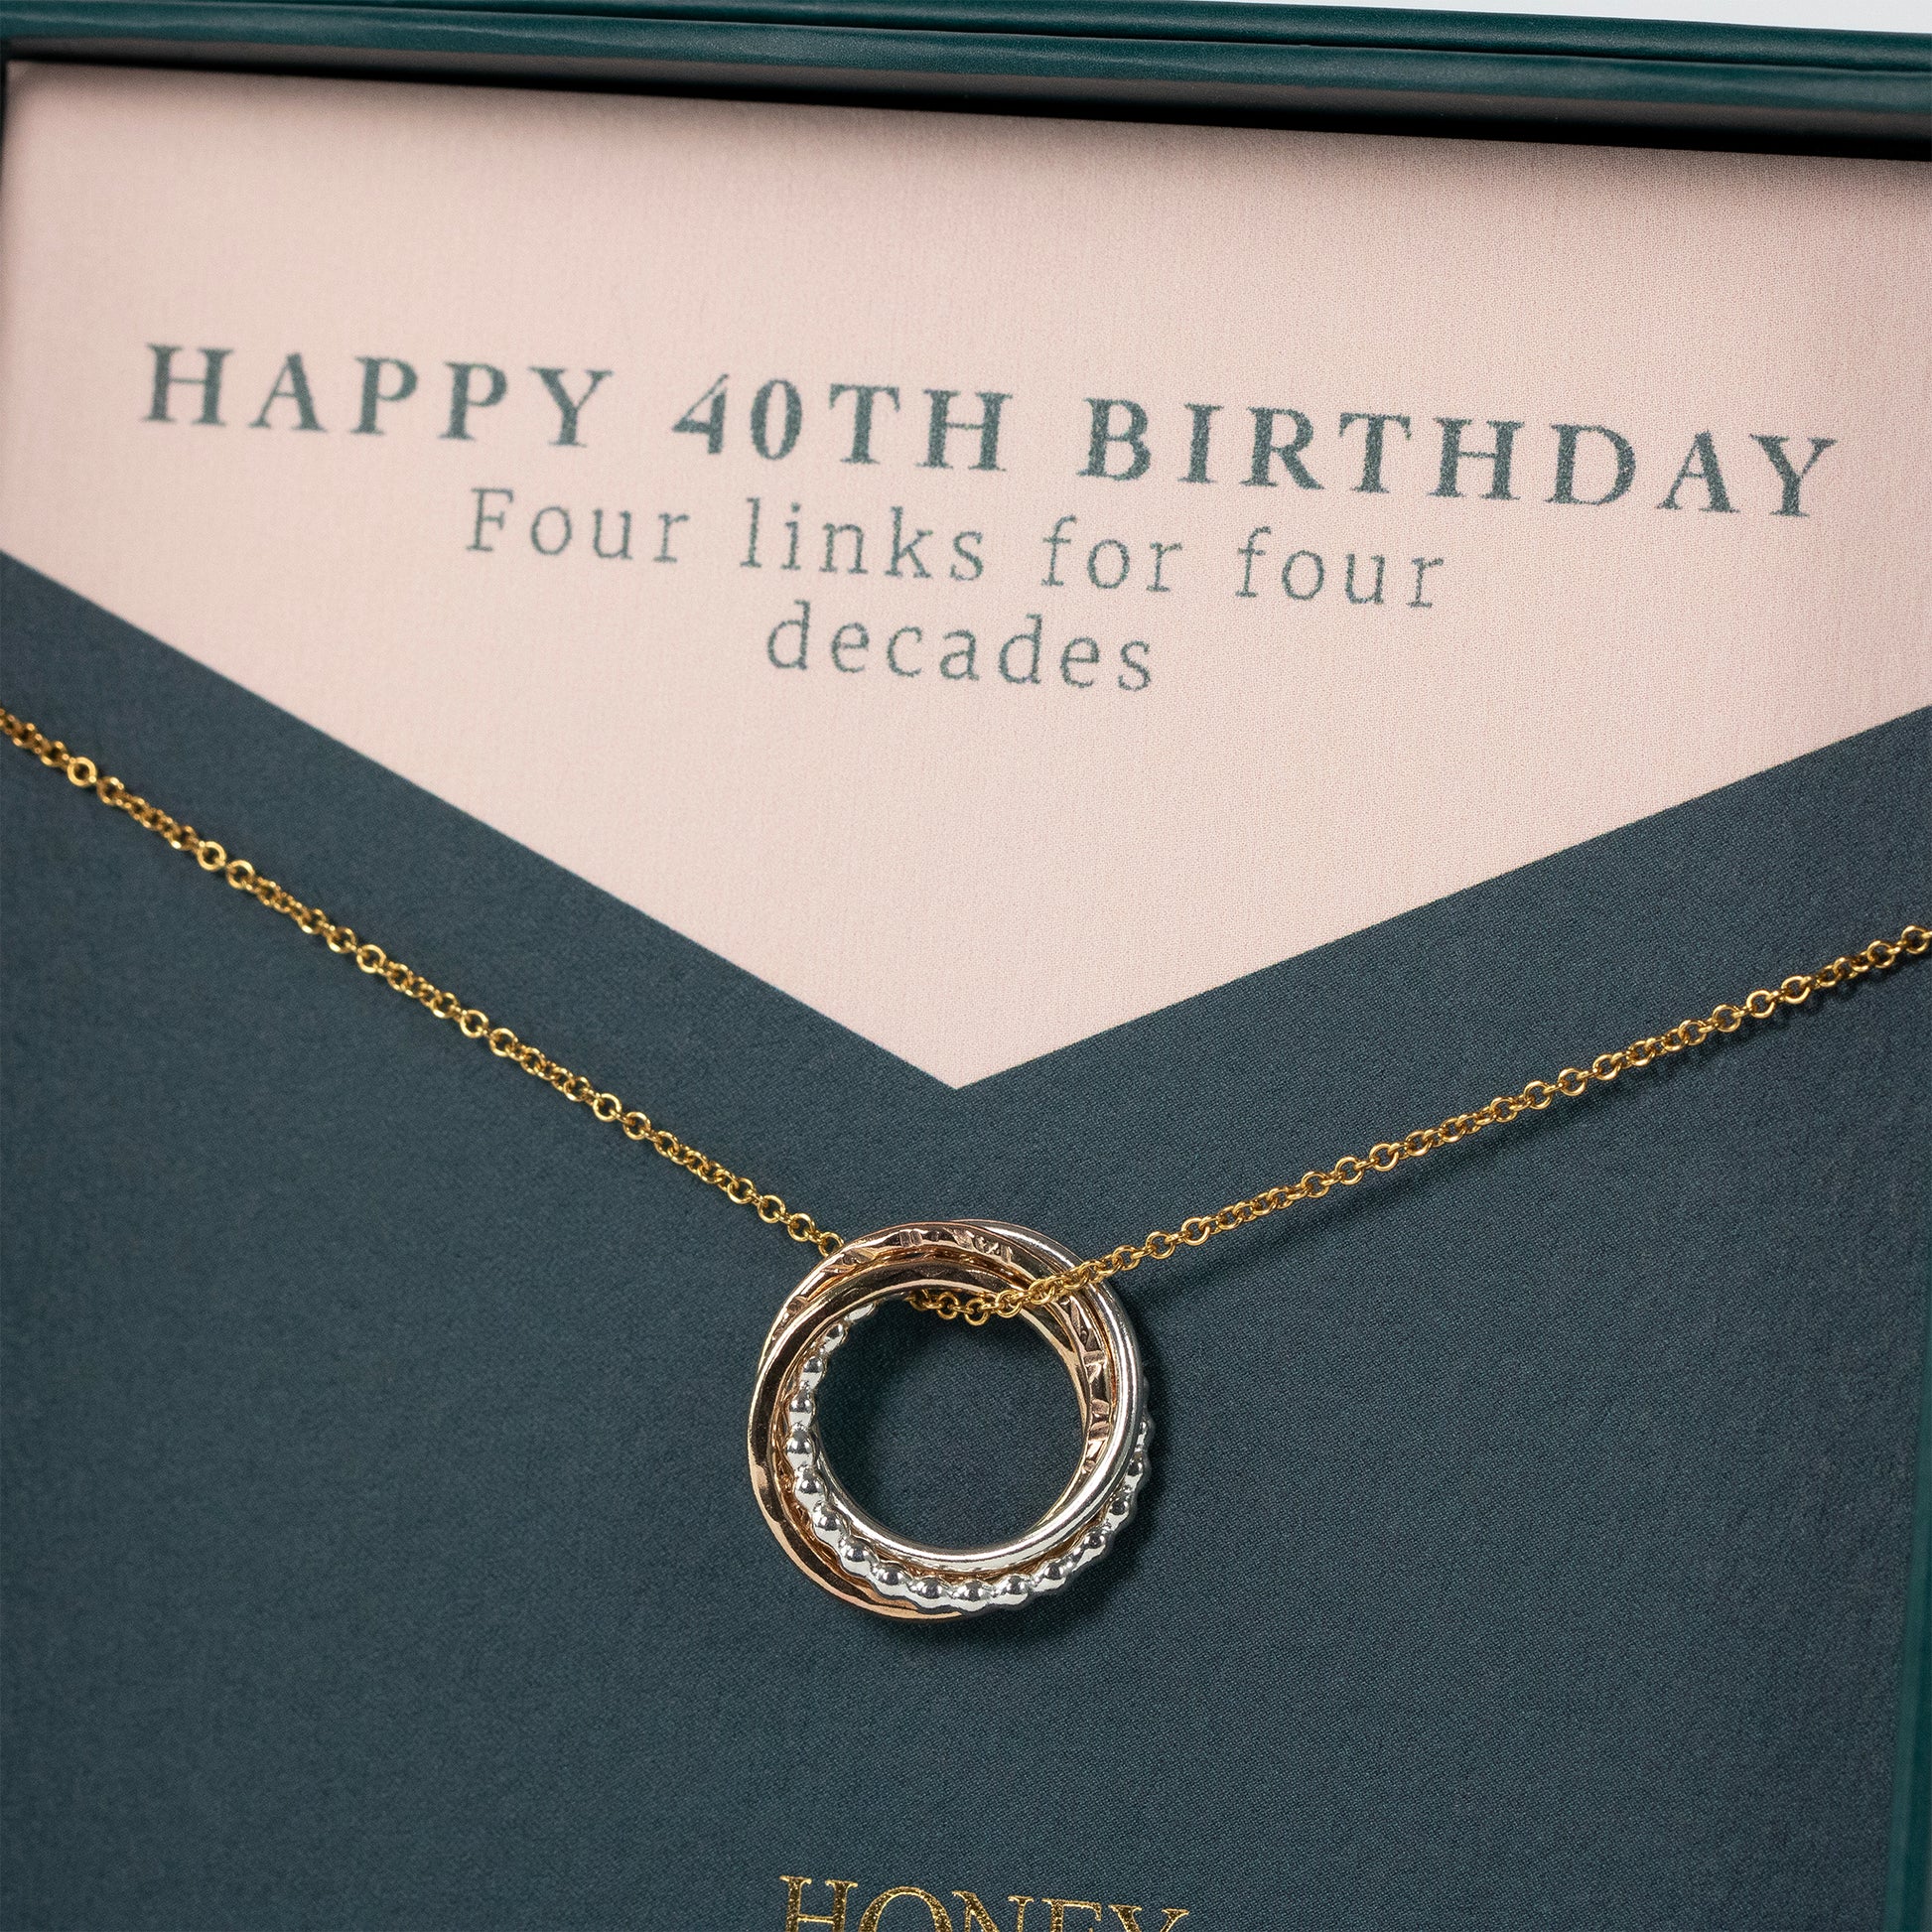 40th Birthday Necklace - The Original 4 Links for 4 Decades Necklace - Petite Silver & Gold